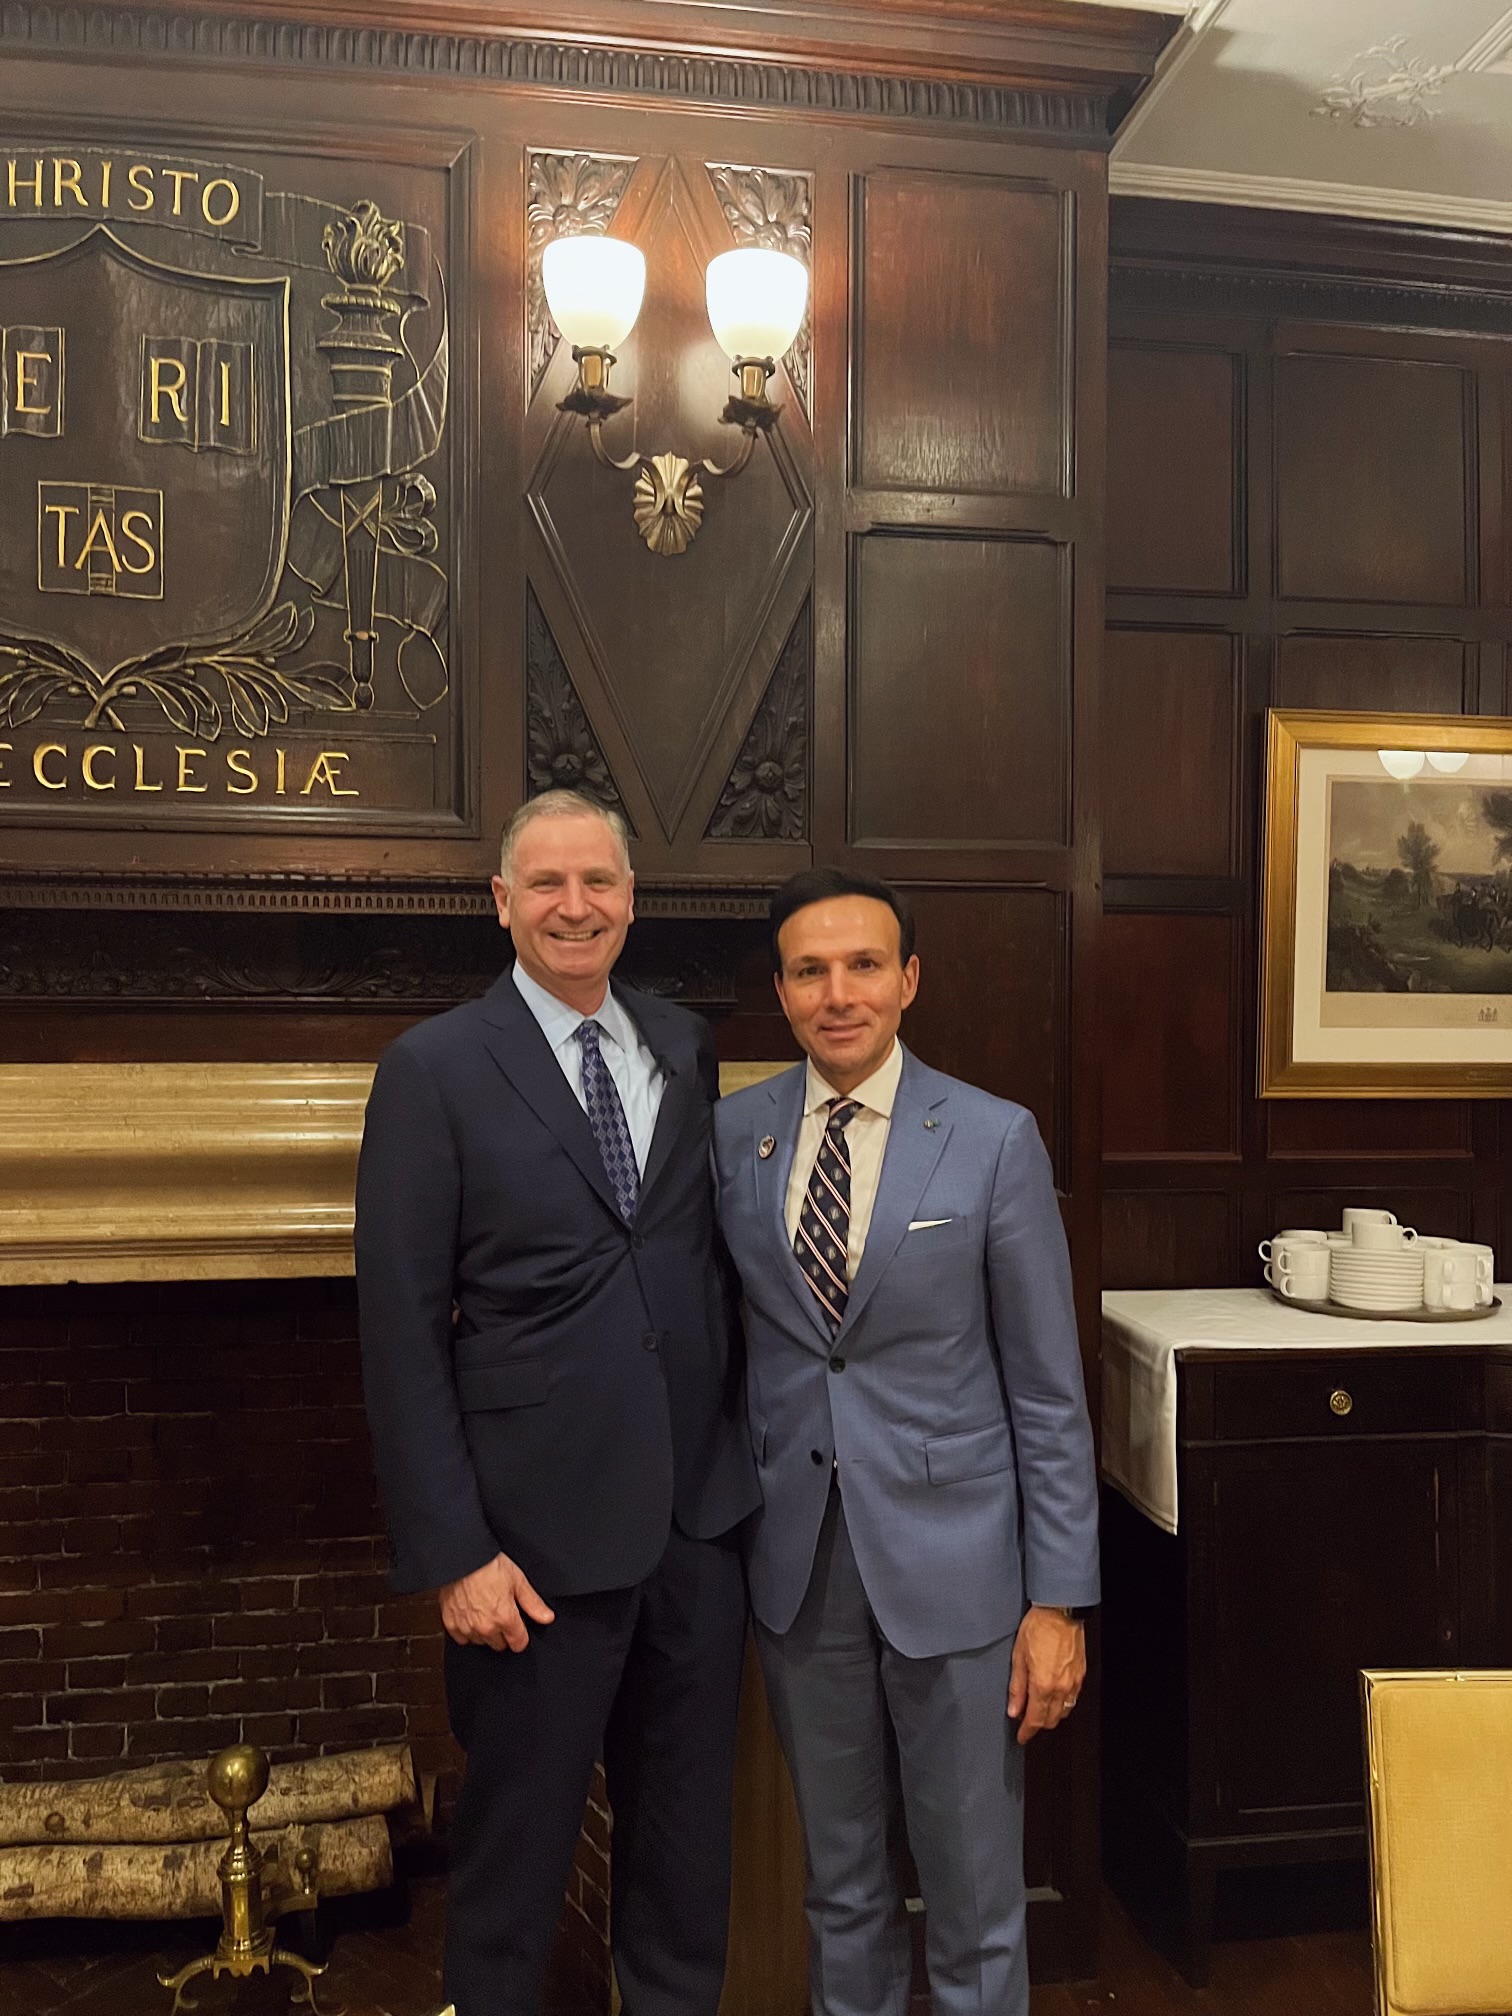 Robert Reiss with George Sifakis, CEO Ideagen Global, at the Harvard Club on October 27th, 2022 for Ideagen Global's Lifetime Leadership UN Event.